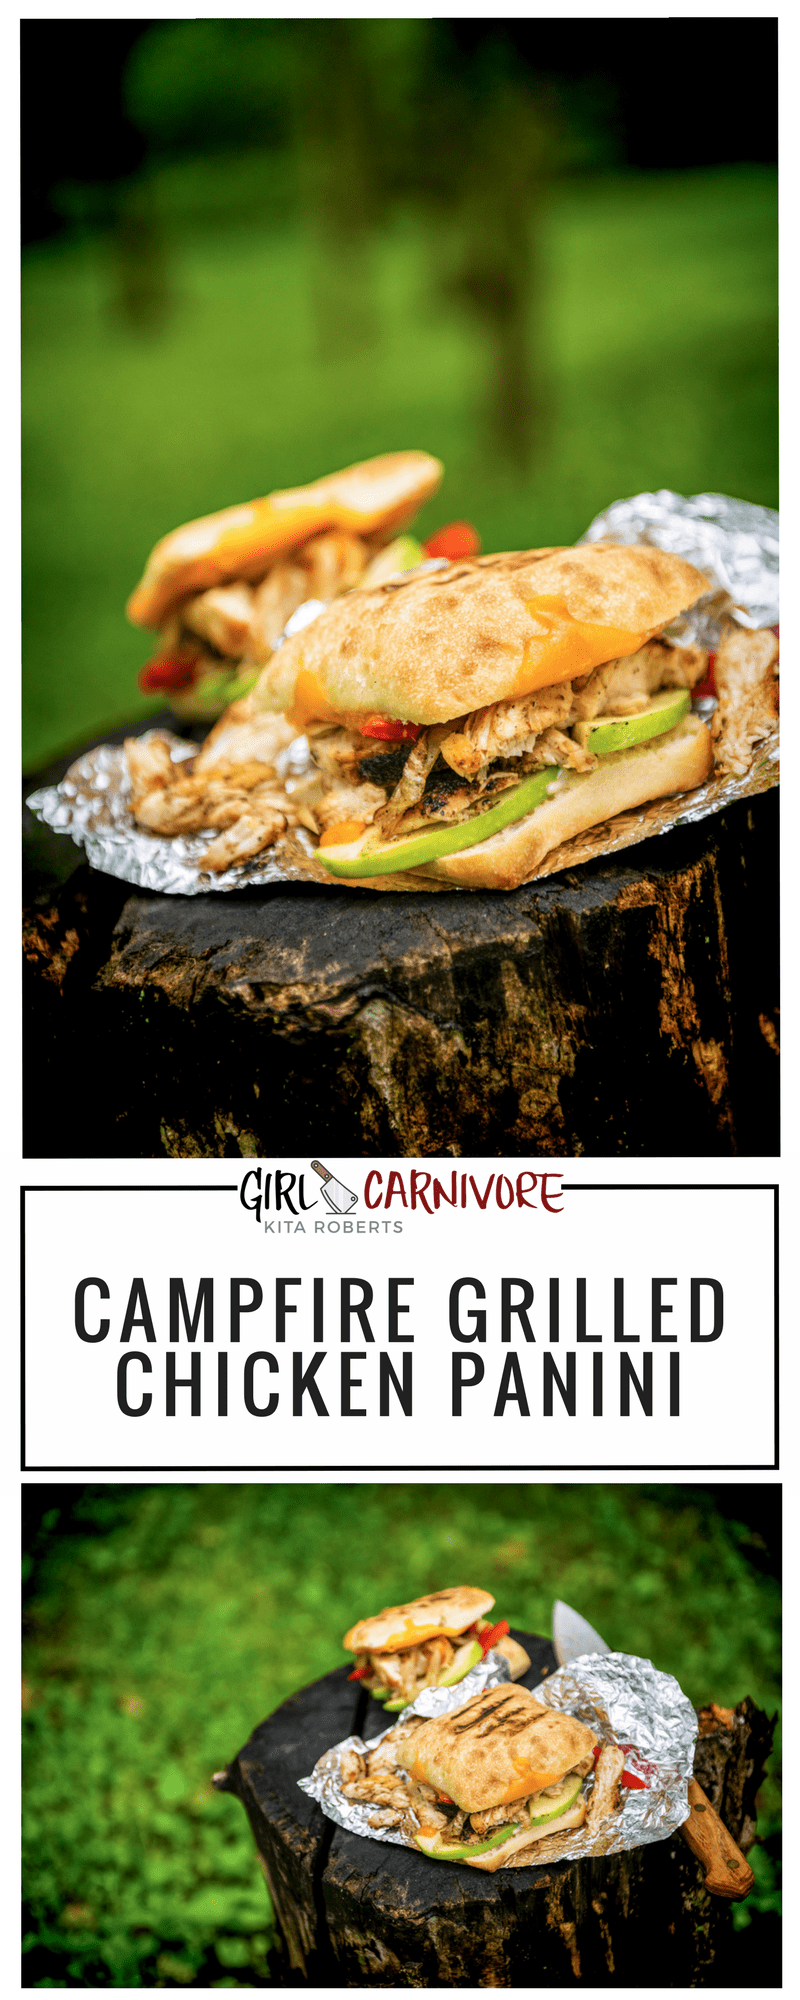 Campfire Grilled Chicken Panini